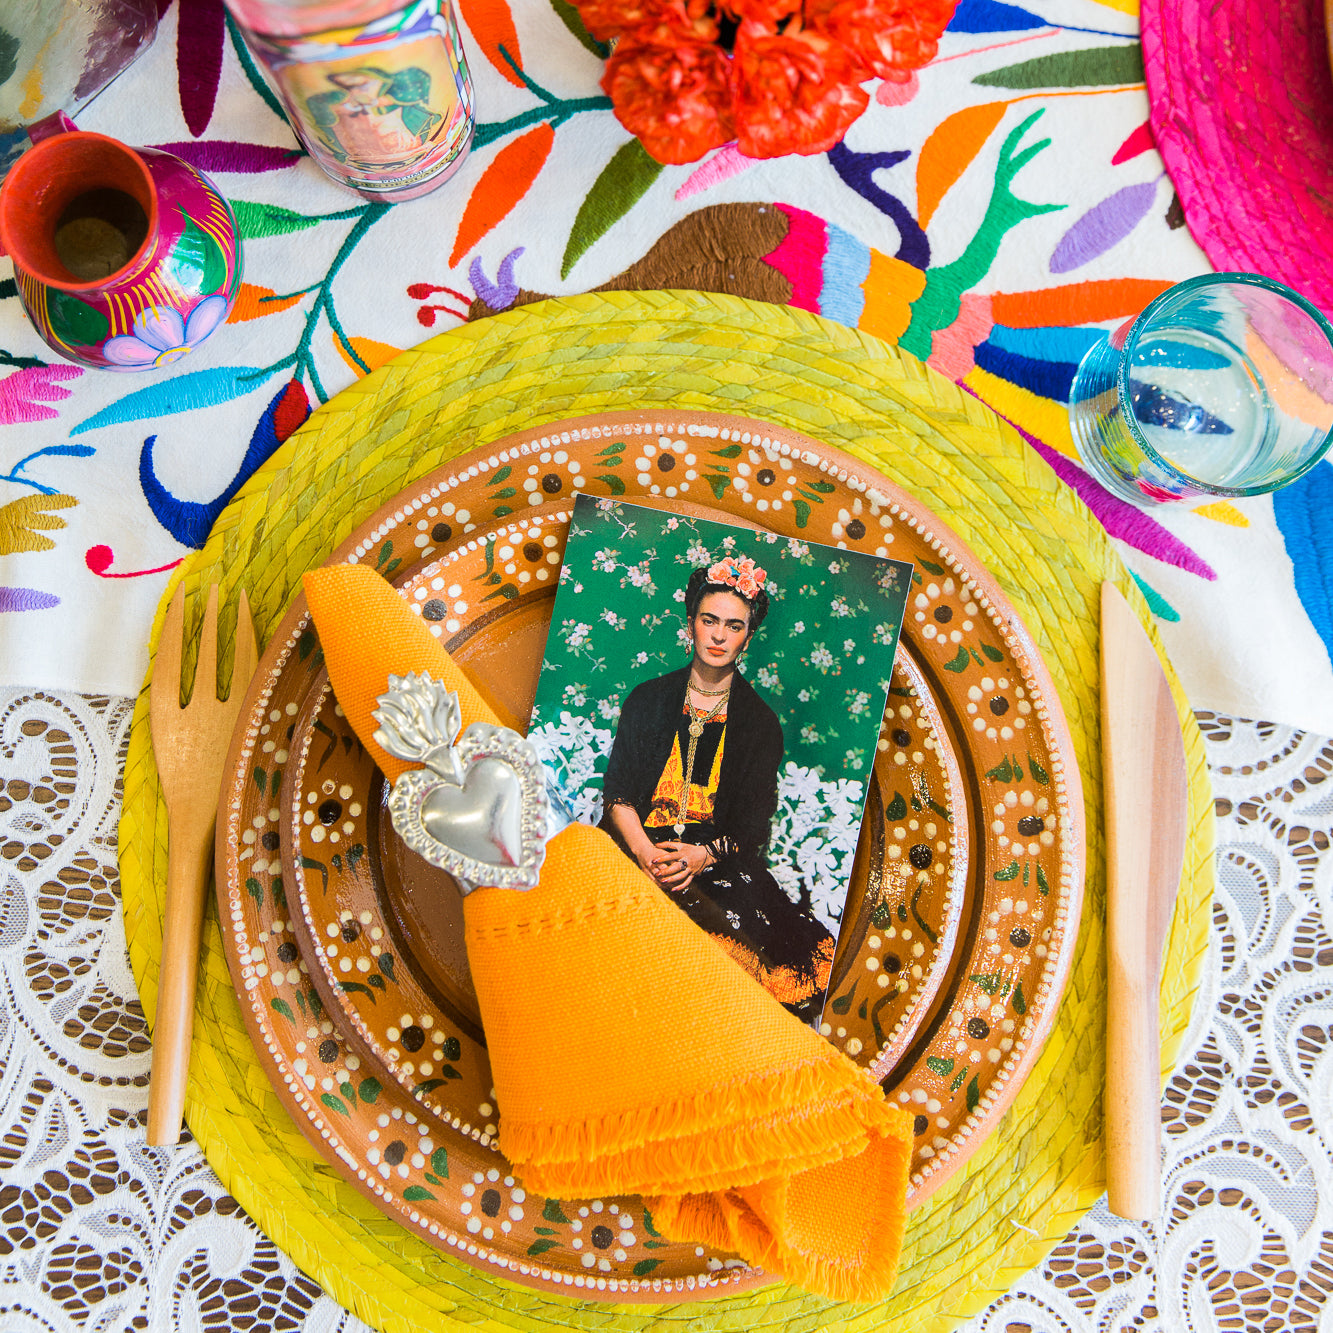 How to Host A Mexico-Inspired Dinner Party